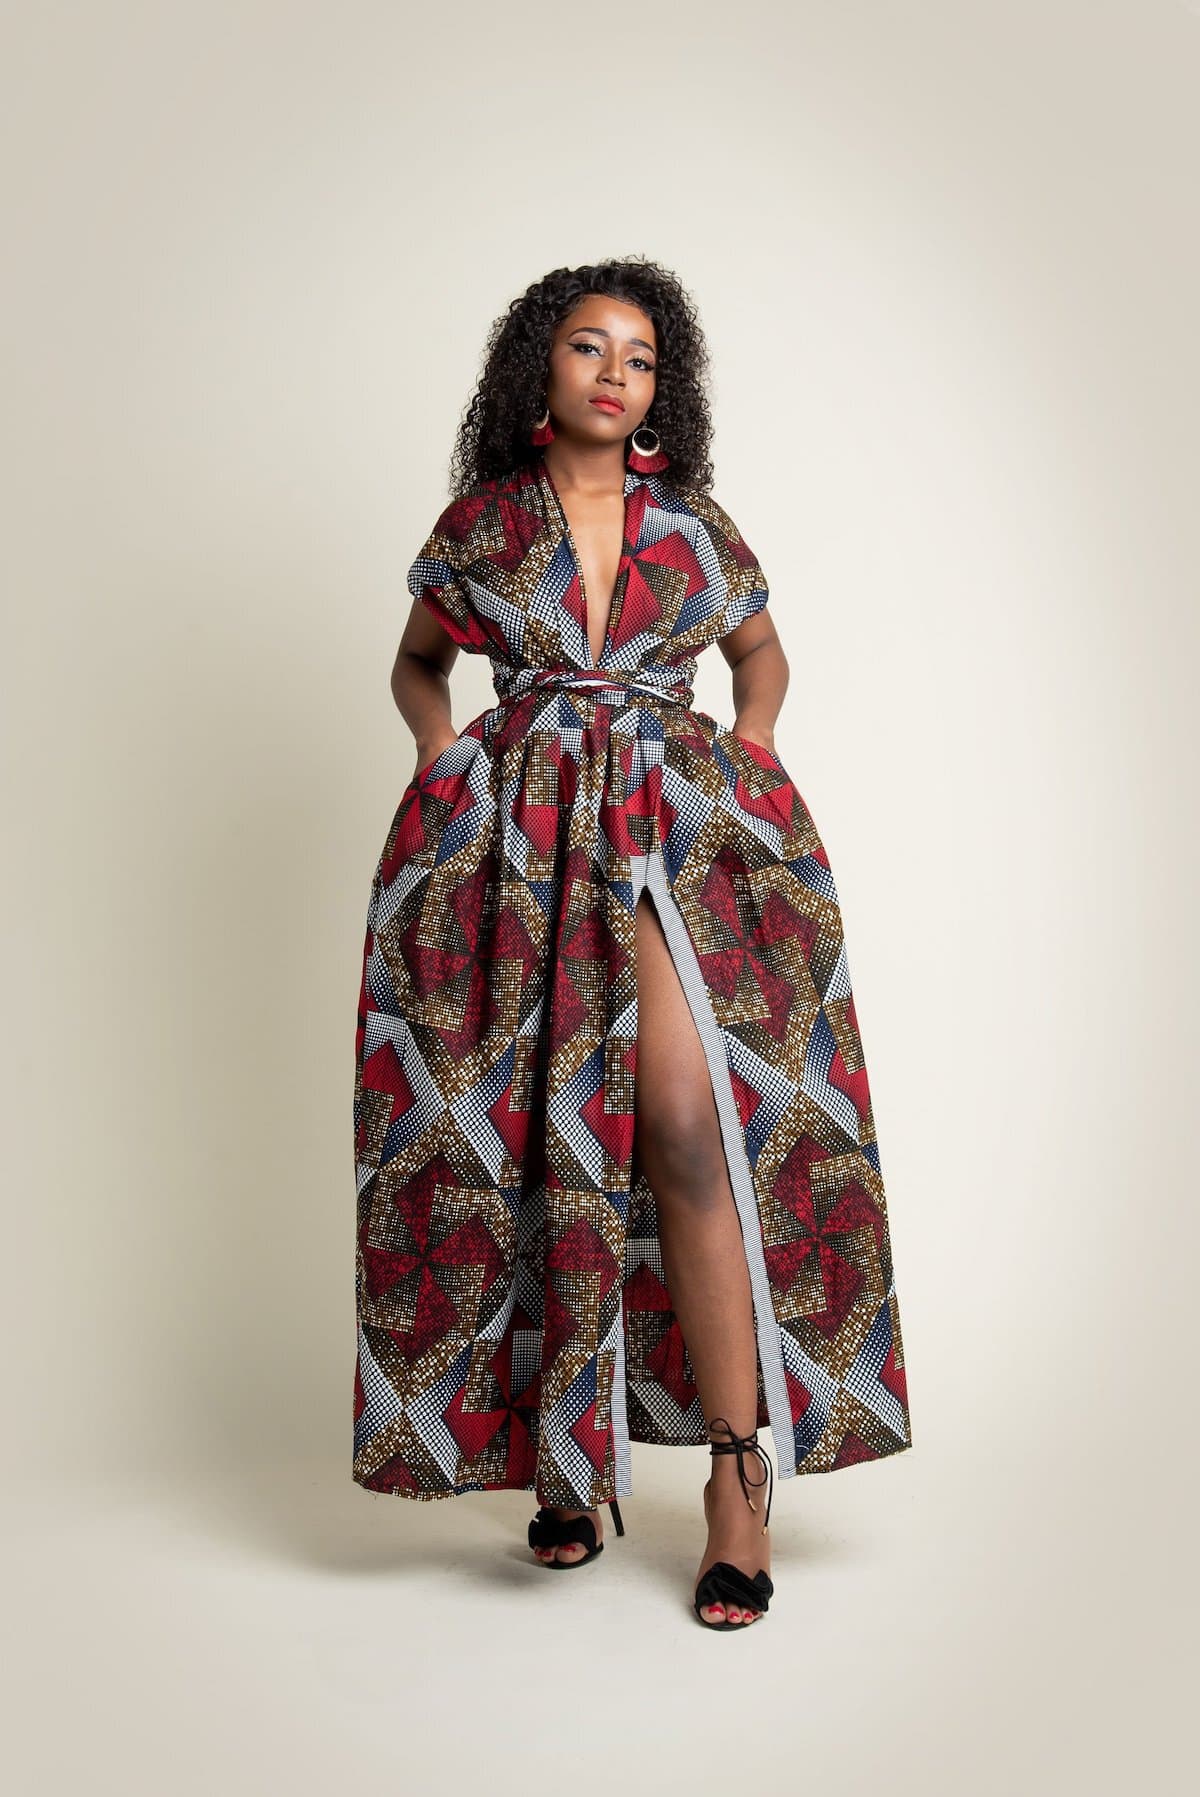 50+ Best African Print Dresses [& where to get them]